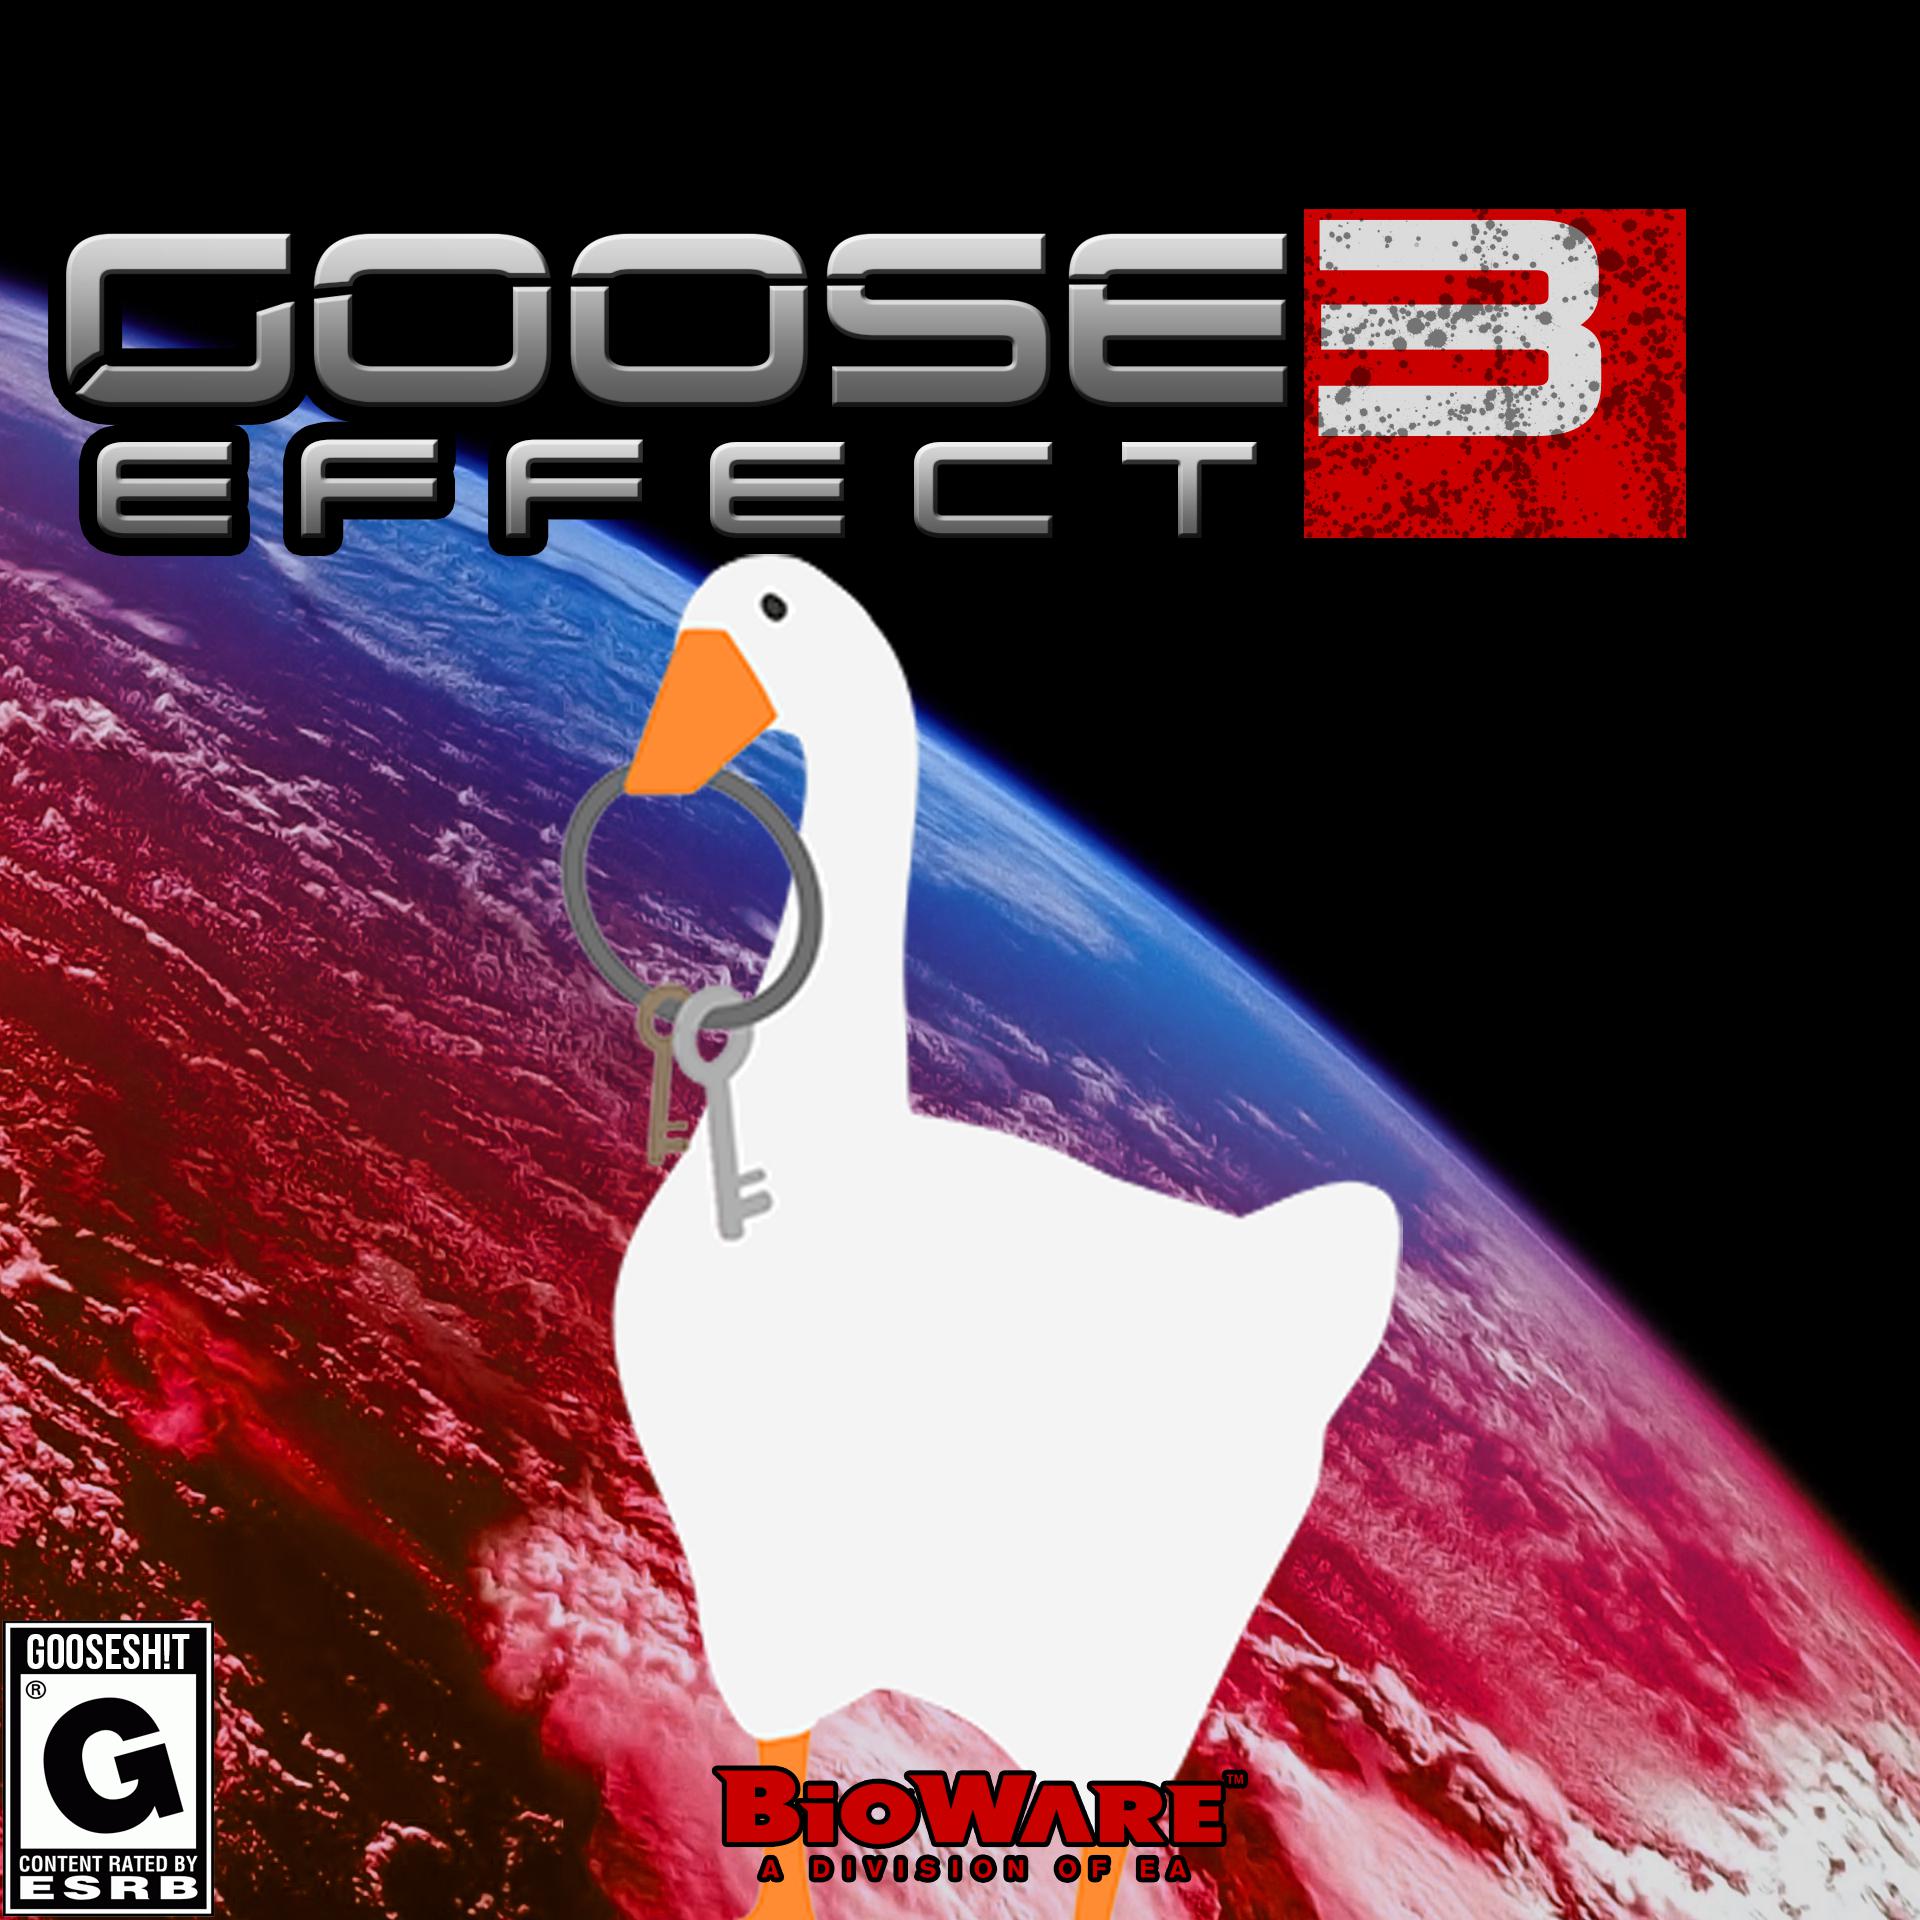 poster - Goose Effect Goosesh!T Bioware Content Rated By Esr B Division Of Ea